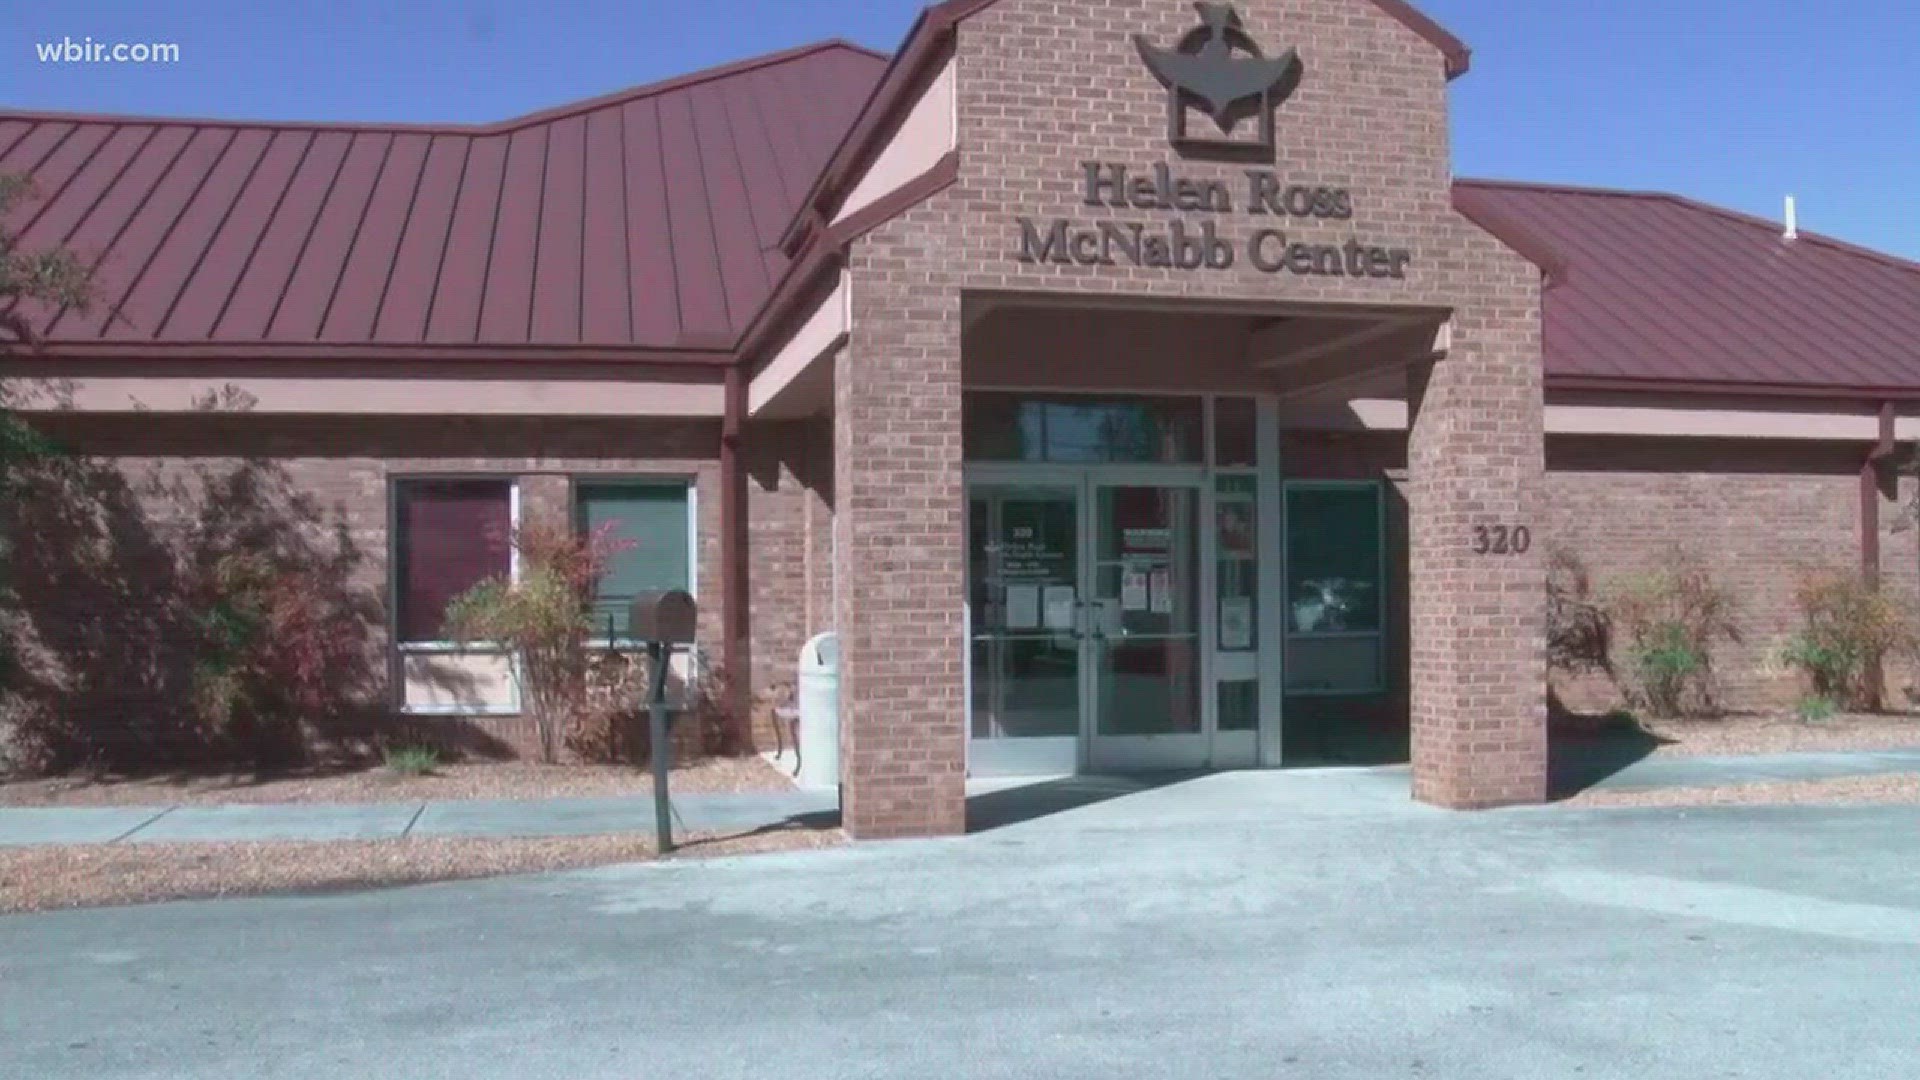 New facility by Helen Ross McNabb Center in Morristown offers more help for people struggling with opioid addiction